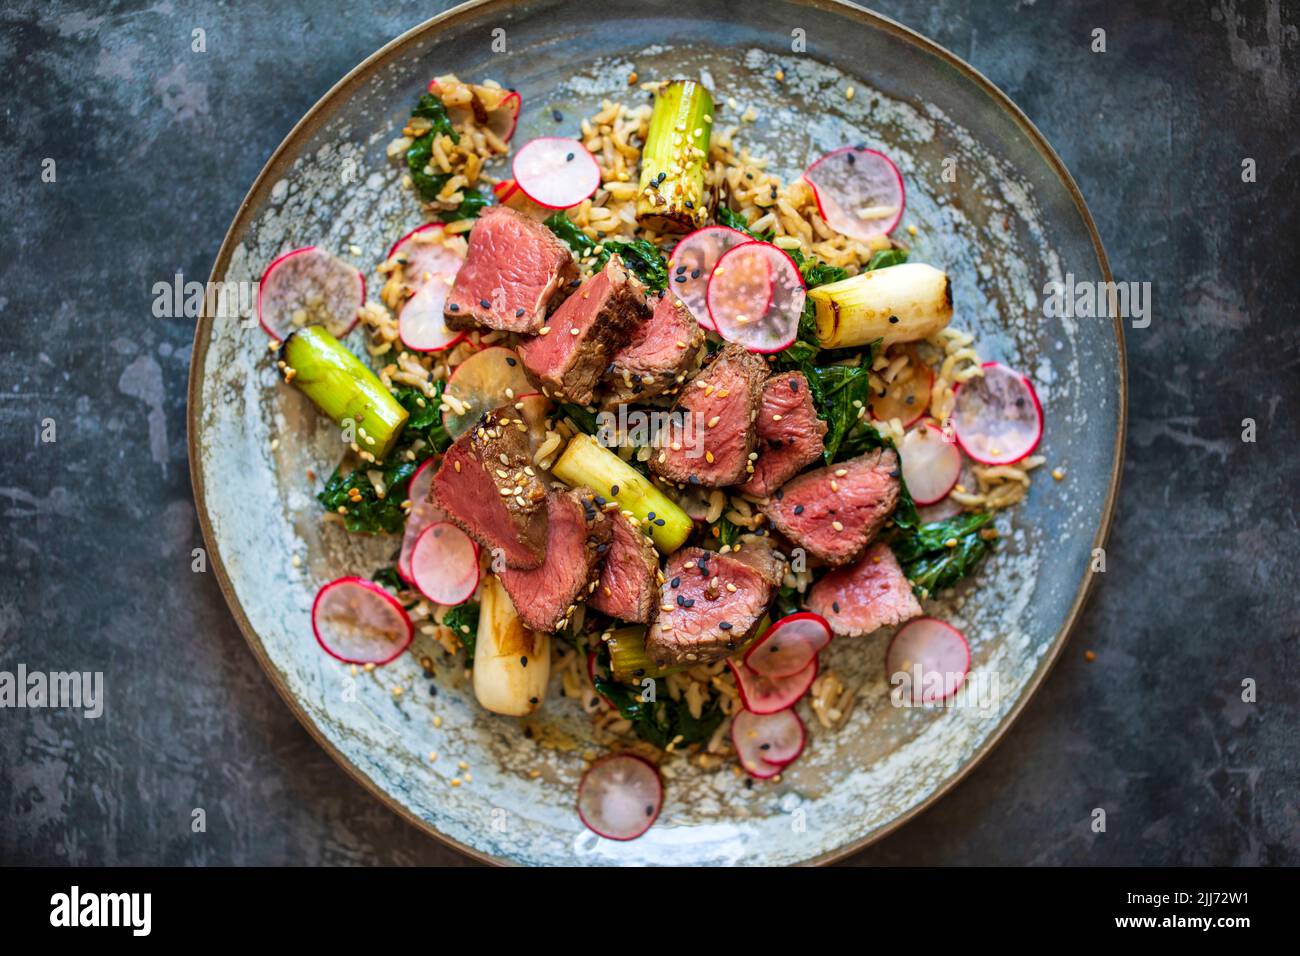 Beef steak with rice, kale and radishes Stock Photo